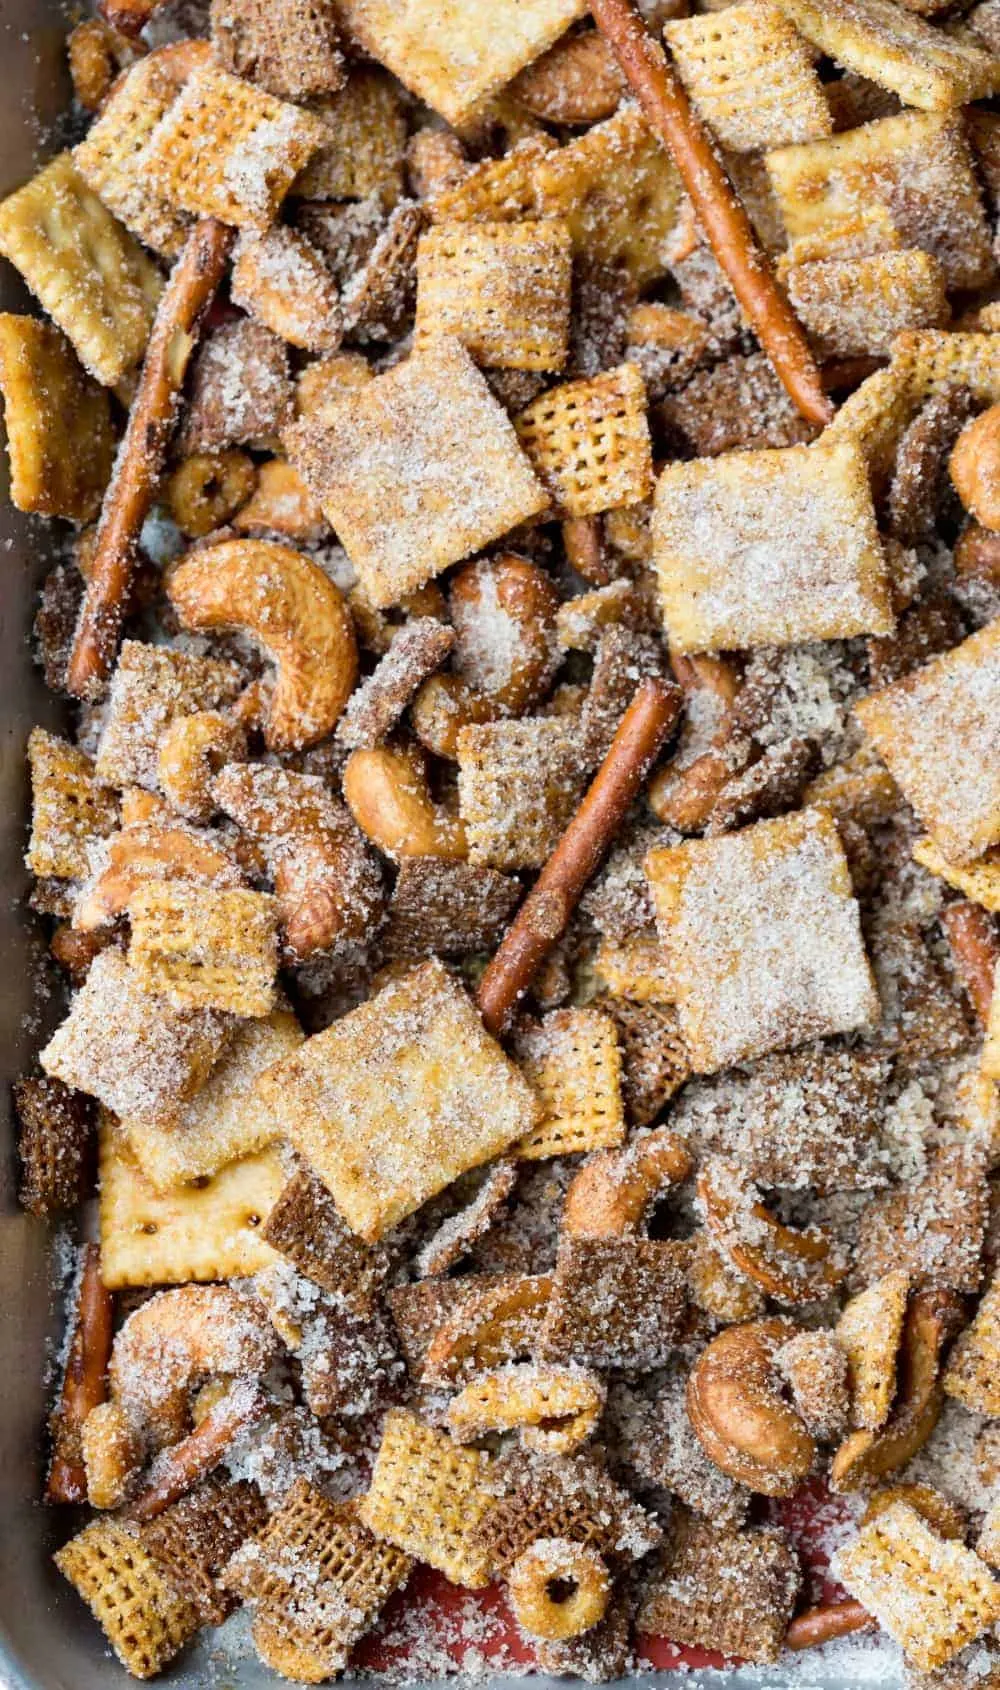 Cinnamon Sugar Sweet and Salty Chex Mix